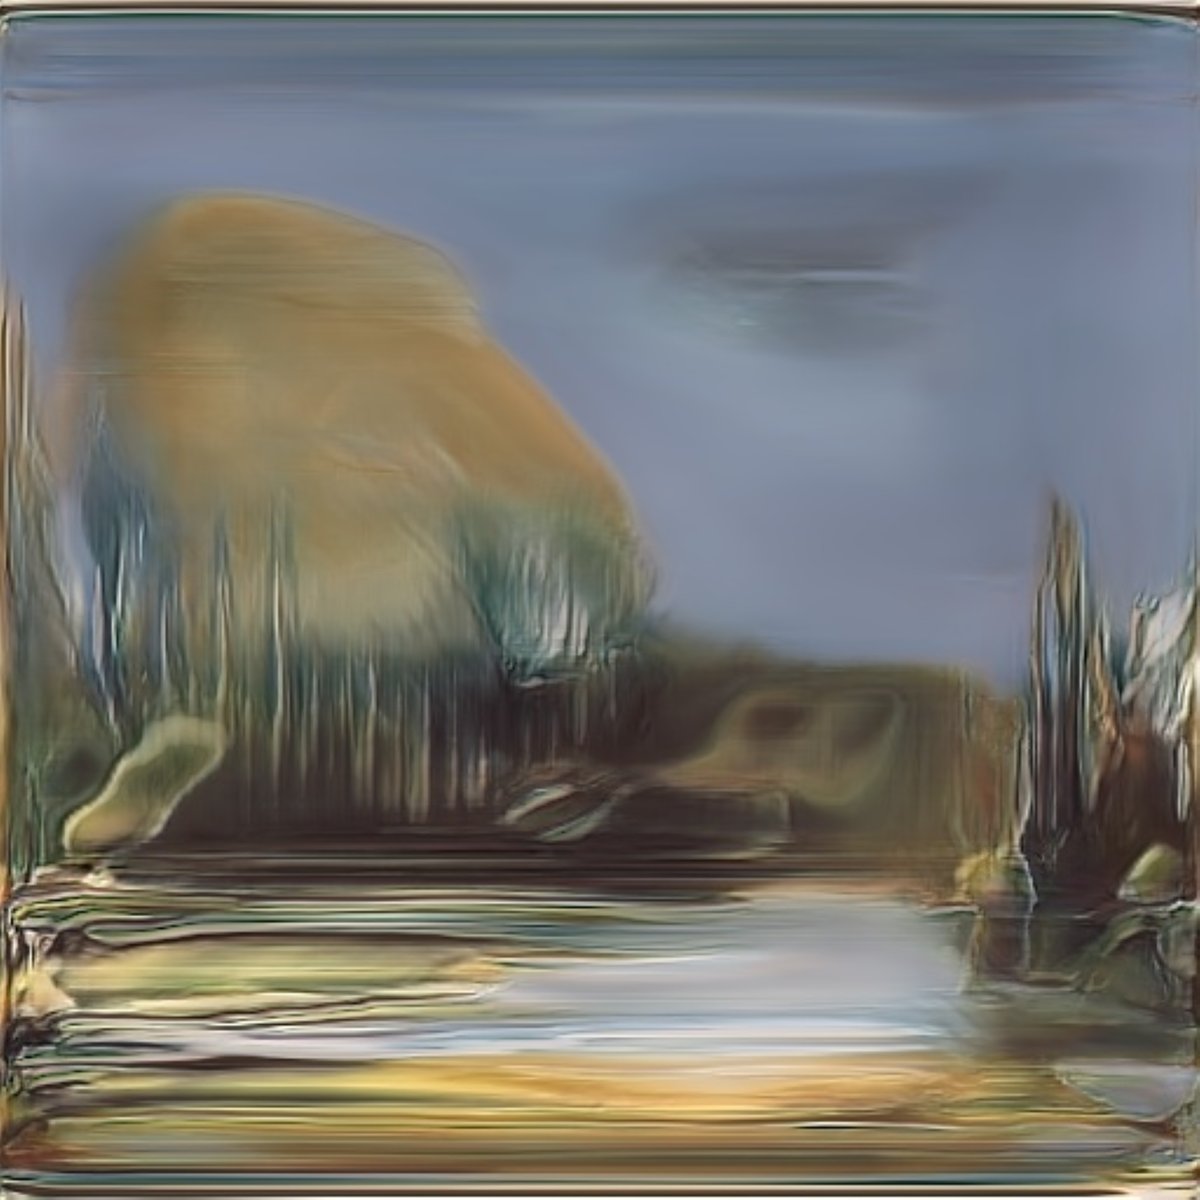 Silent Swamp
From my 'Dreamscapes' collection. 
See them all on Foundation:
foundation.app/@rickcrites?ta…

#SurrealArt #AbstractArt #ImpressionistArt #NFTArt